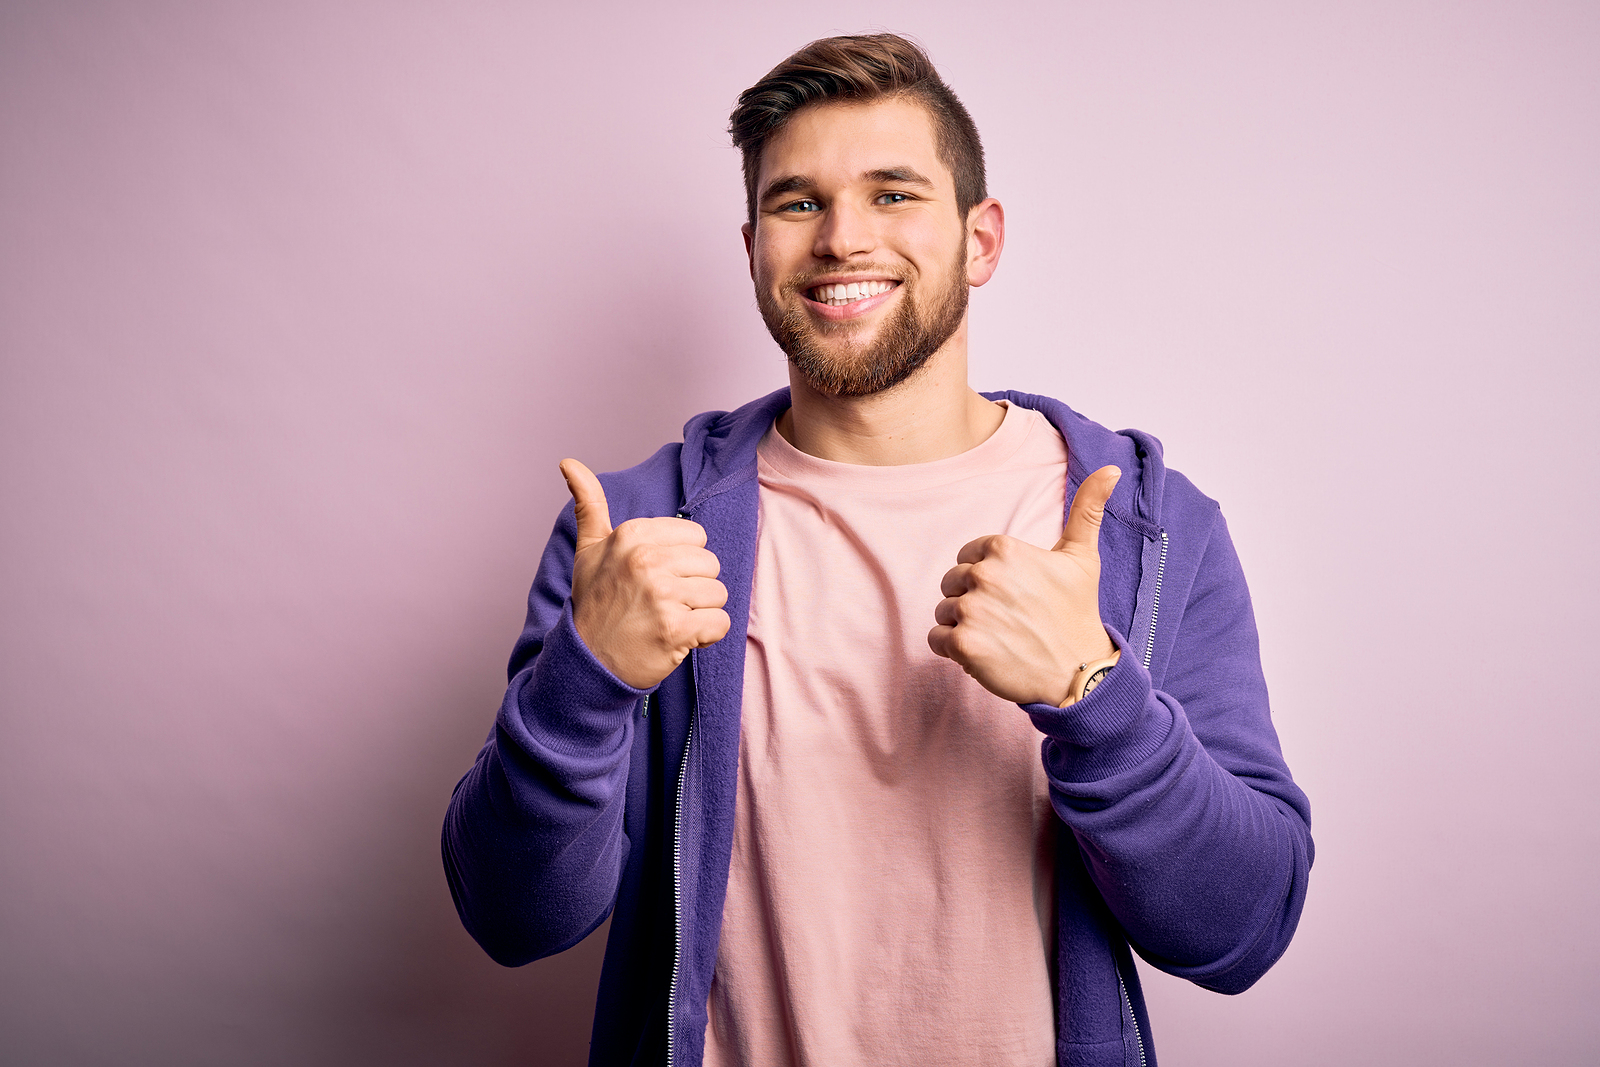 A young attractive man smiles showing thumbs up with both hands against a plain background.